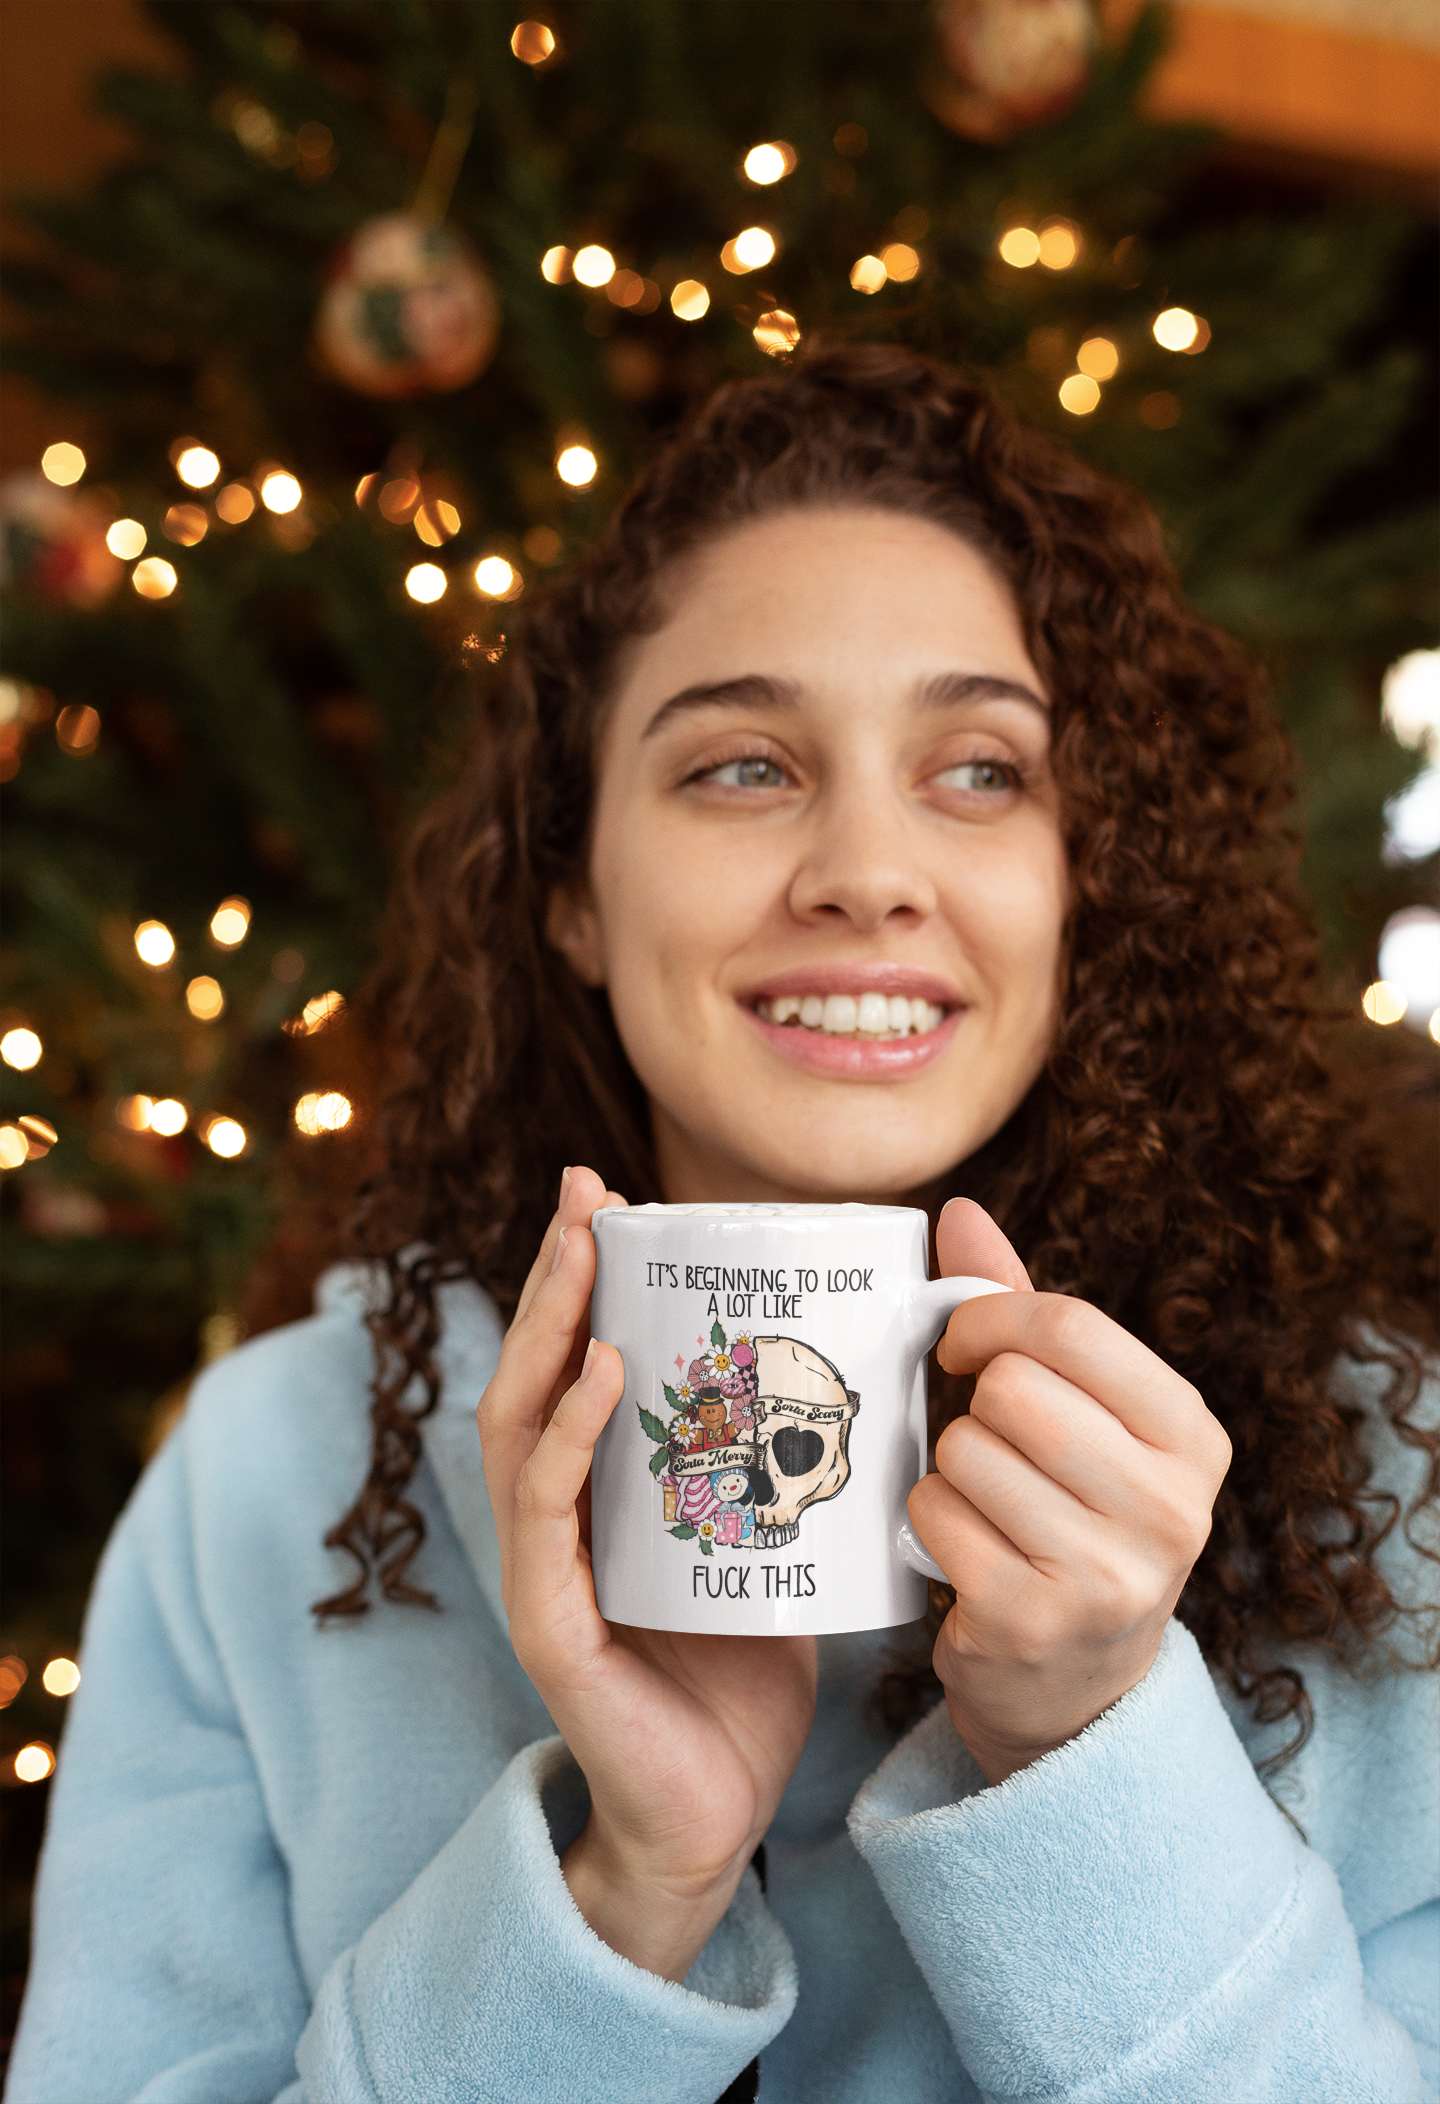 It's Beginning To Look A Lot Like Fuck This Mug